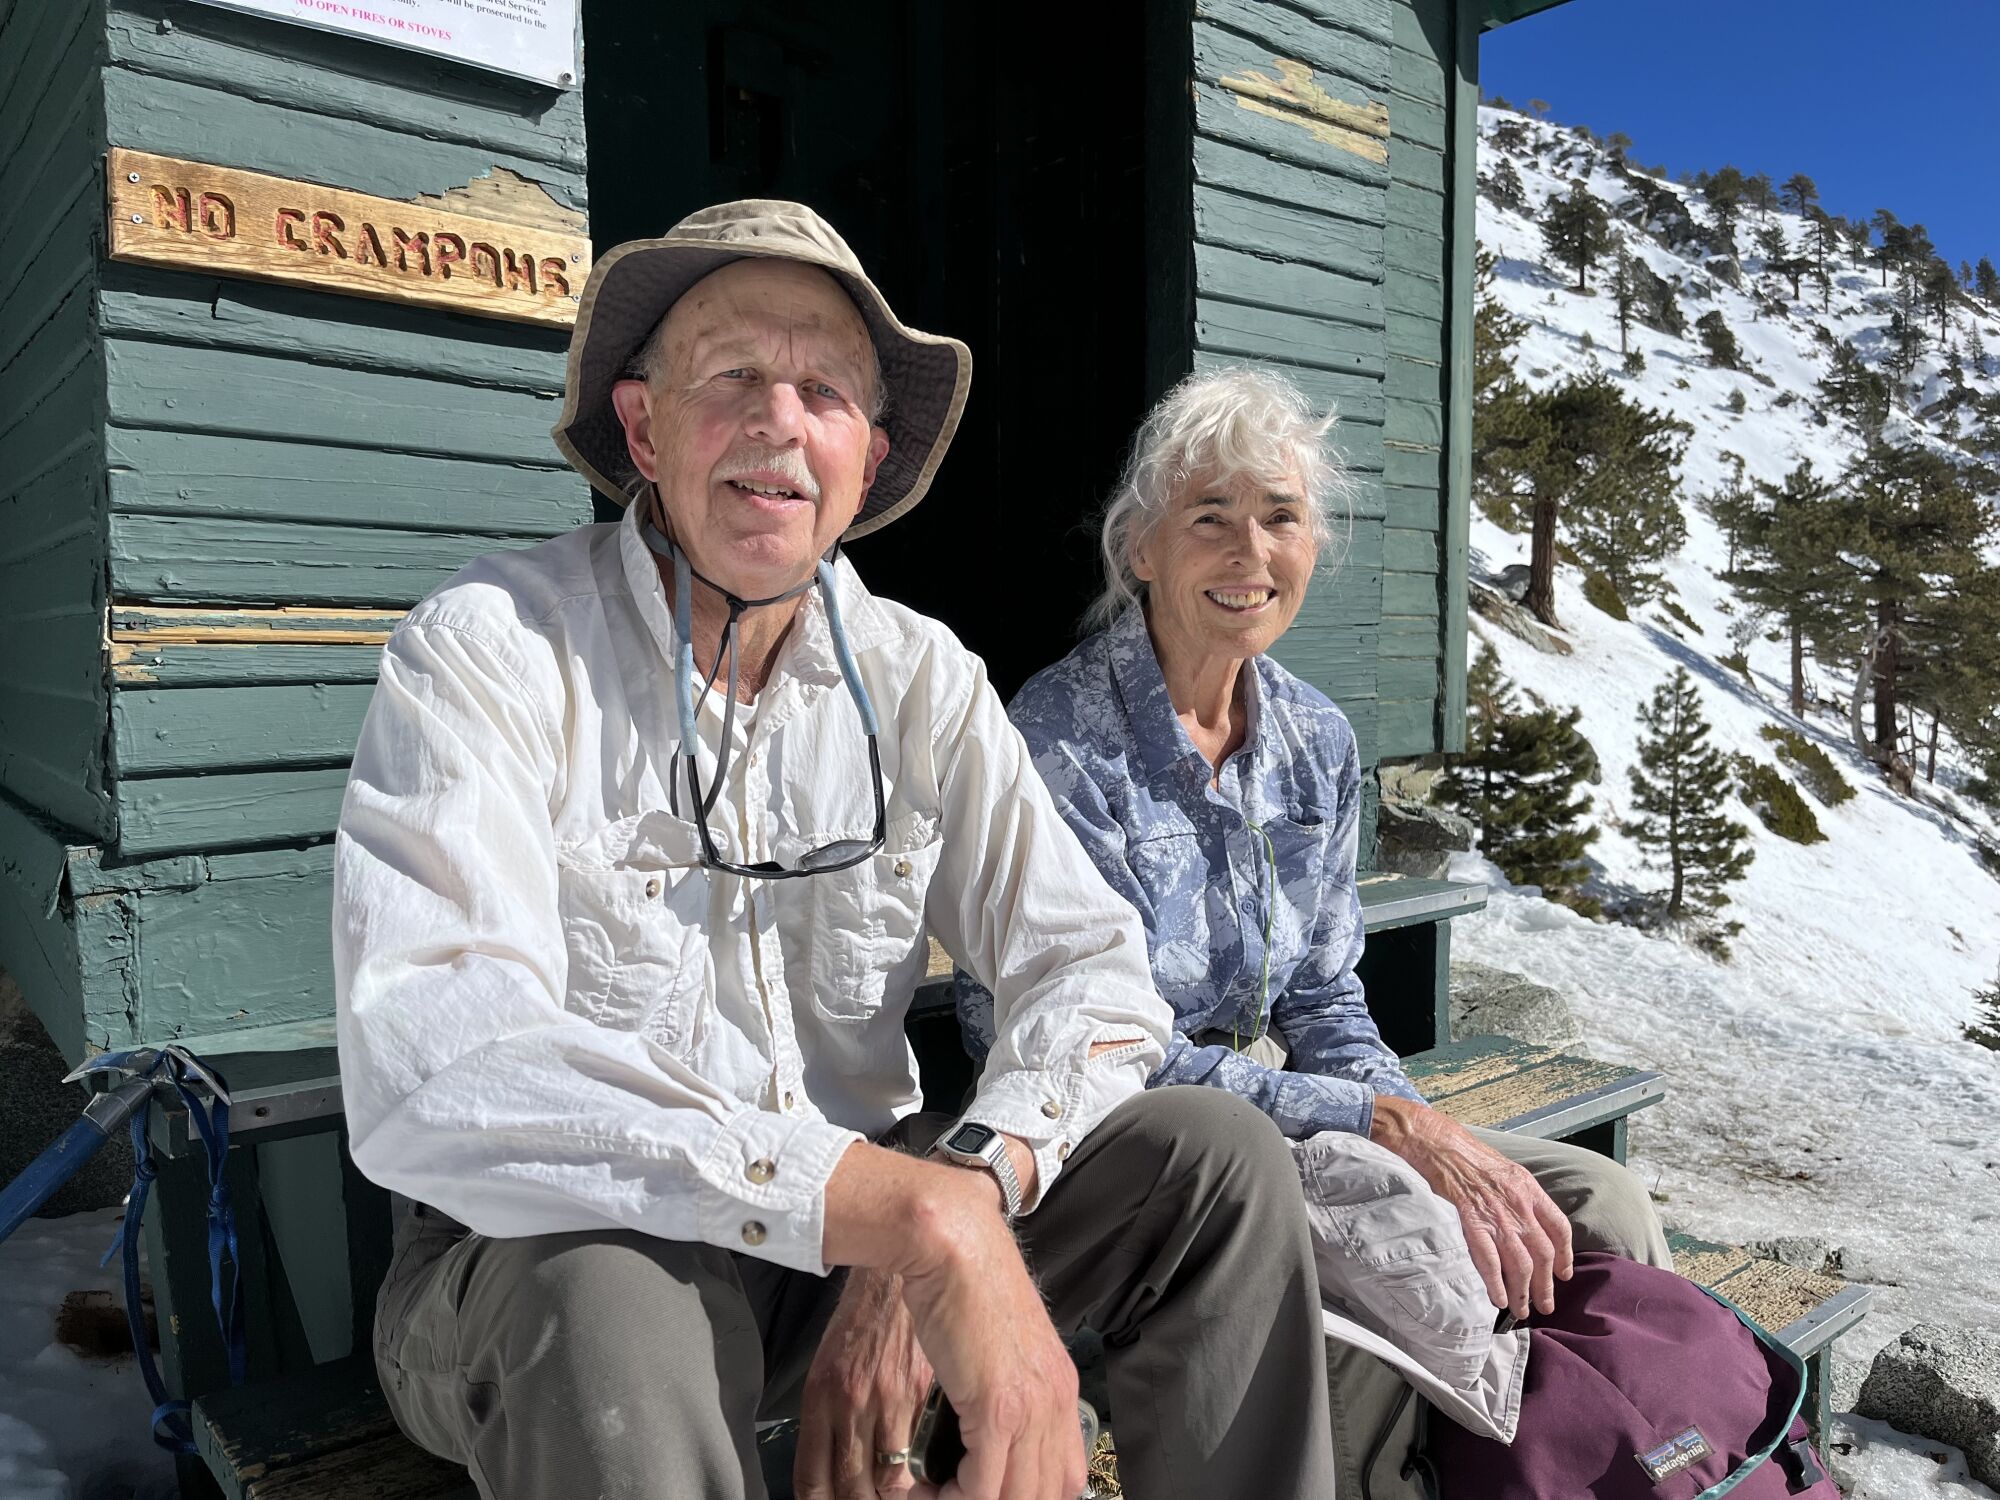 Ron Bartell and Christine Mitchell, retired engineers from Manhattan Beach, have climbed Mt. Baldy more than 400 times.